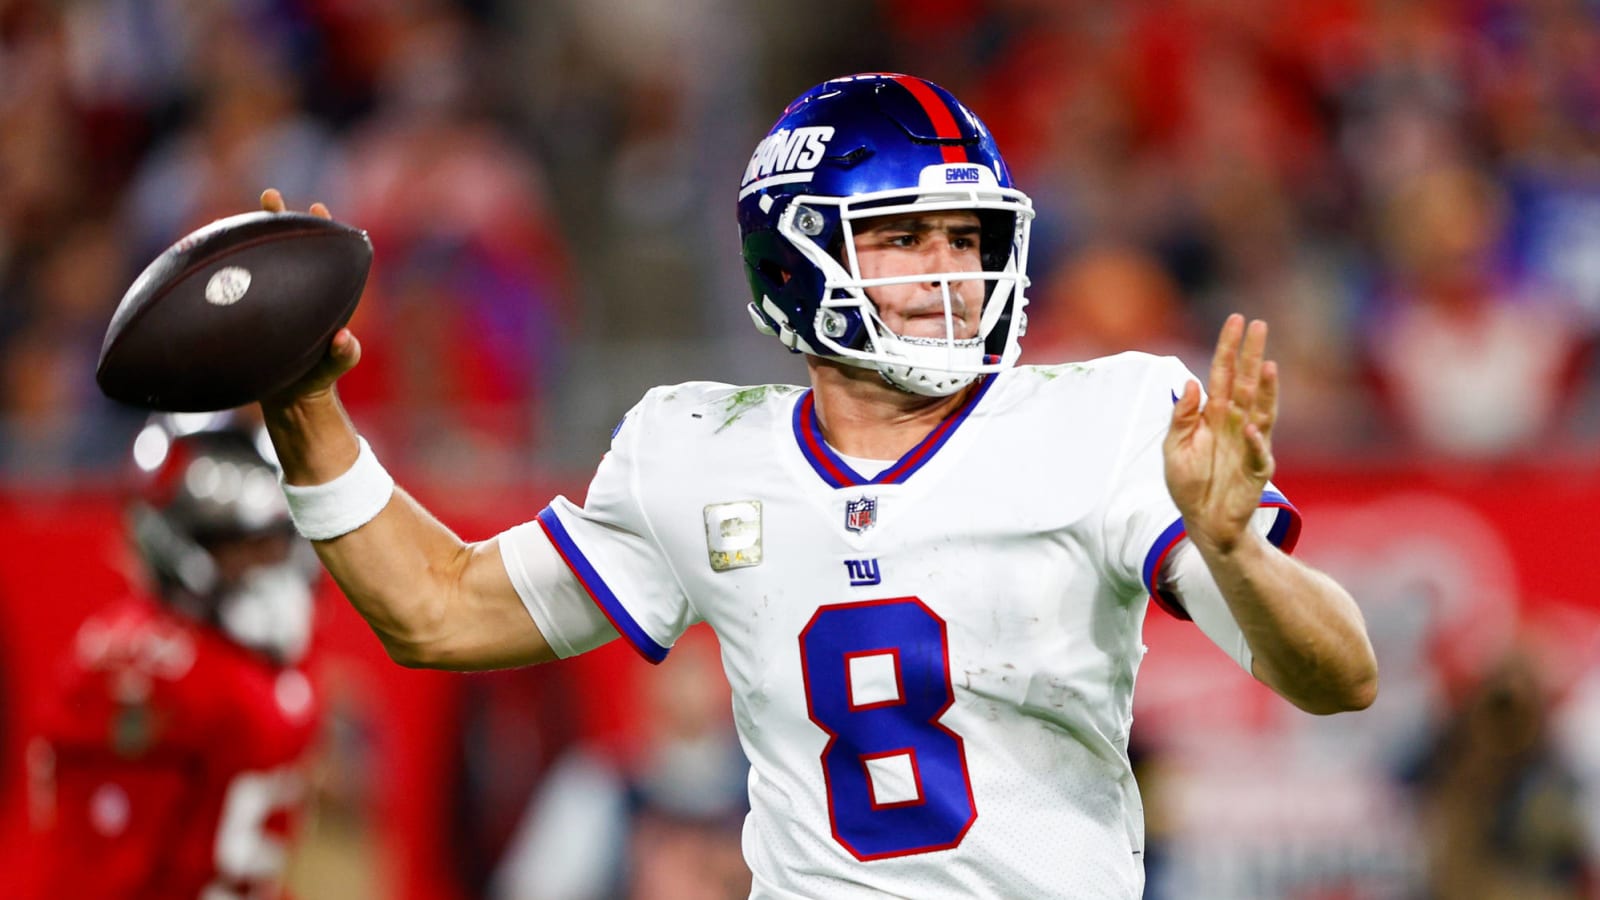 Giants QB Daniel Jones (neck) likely out vs. Chargers